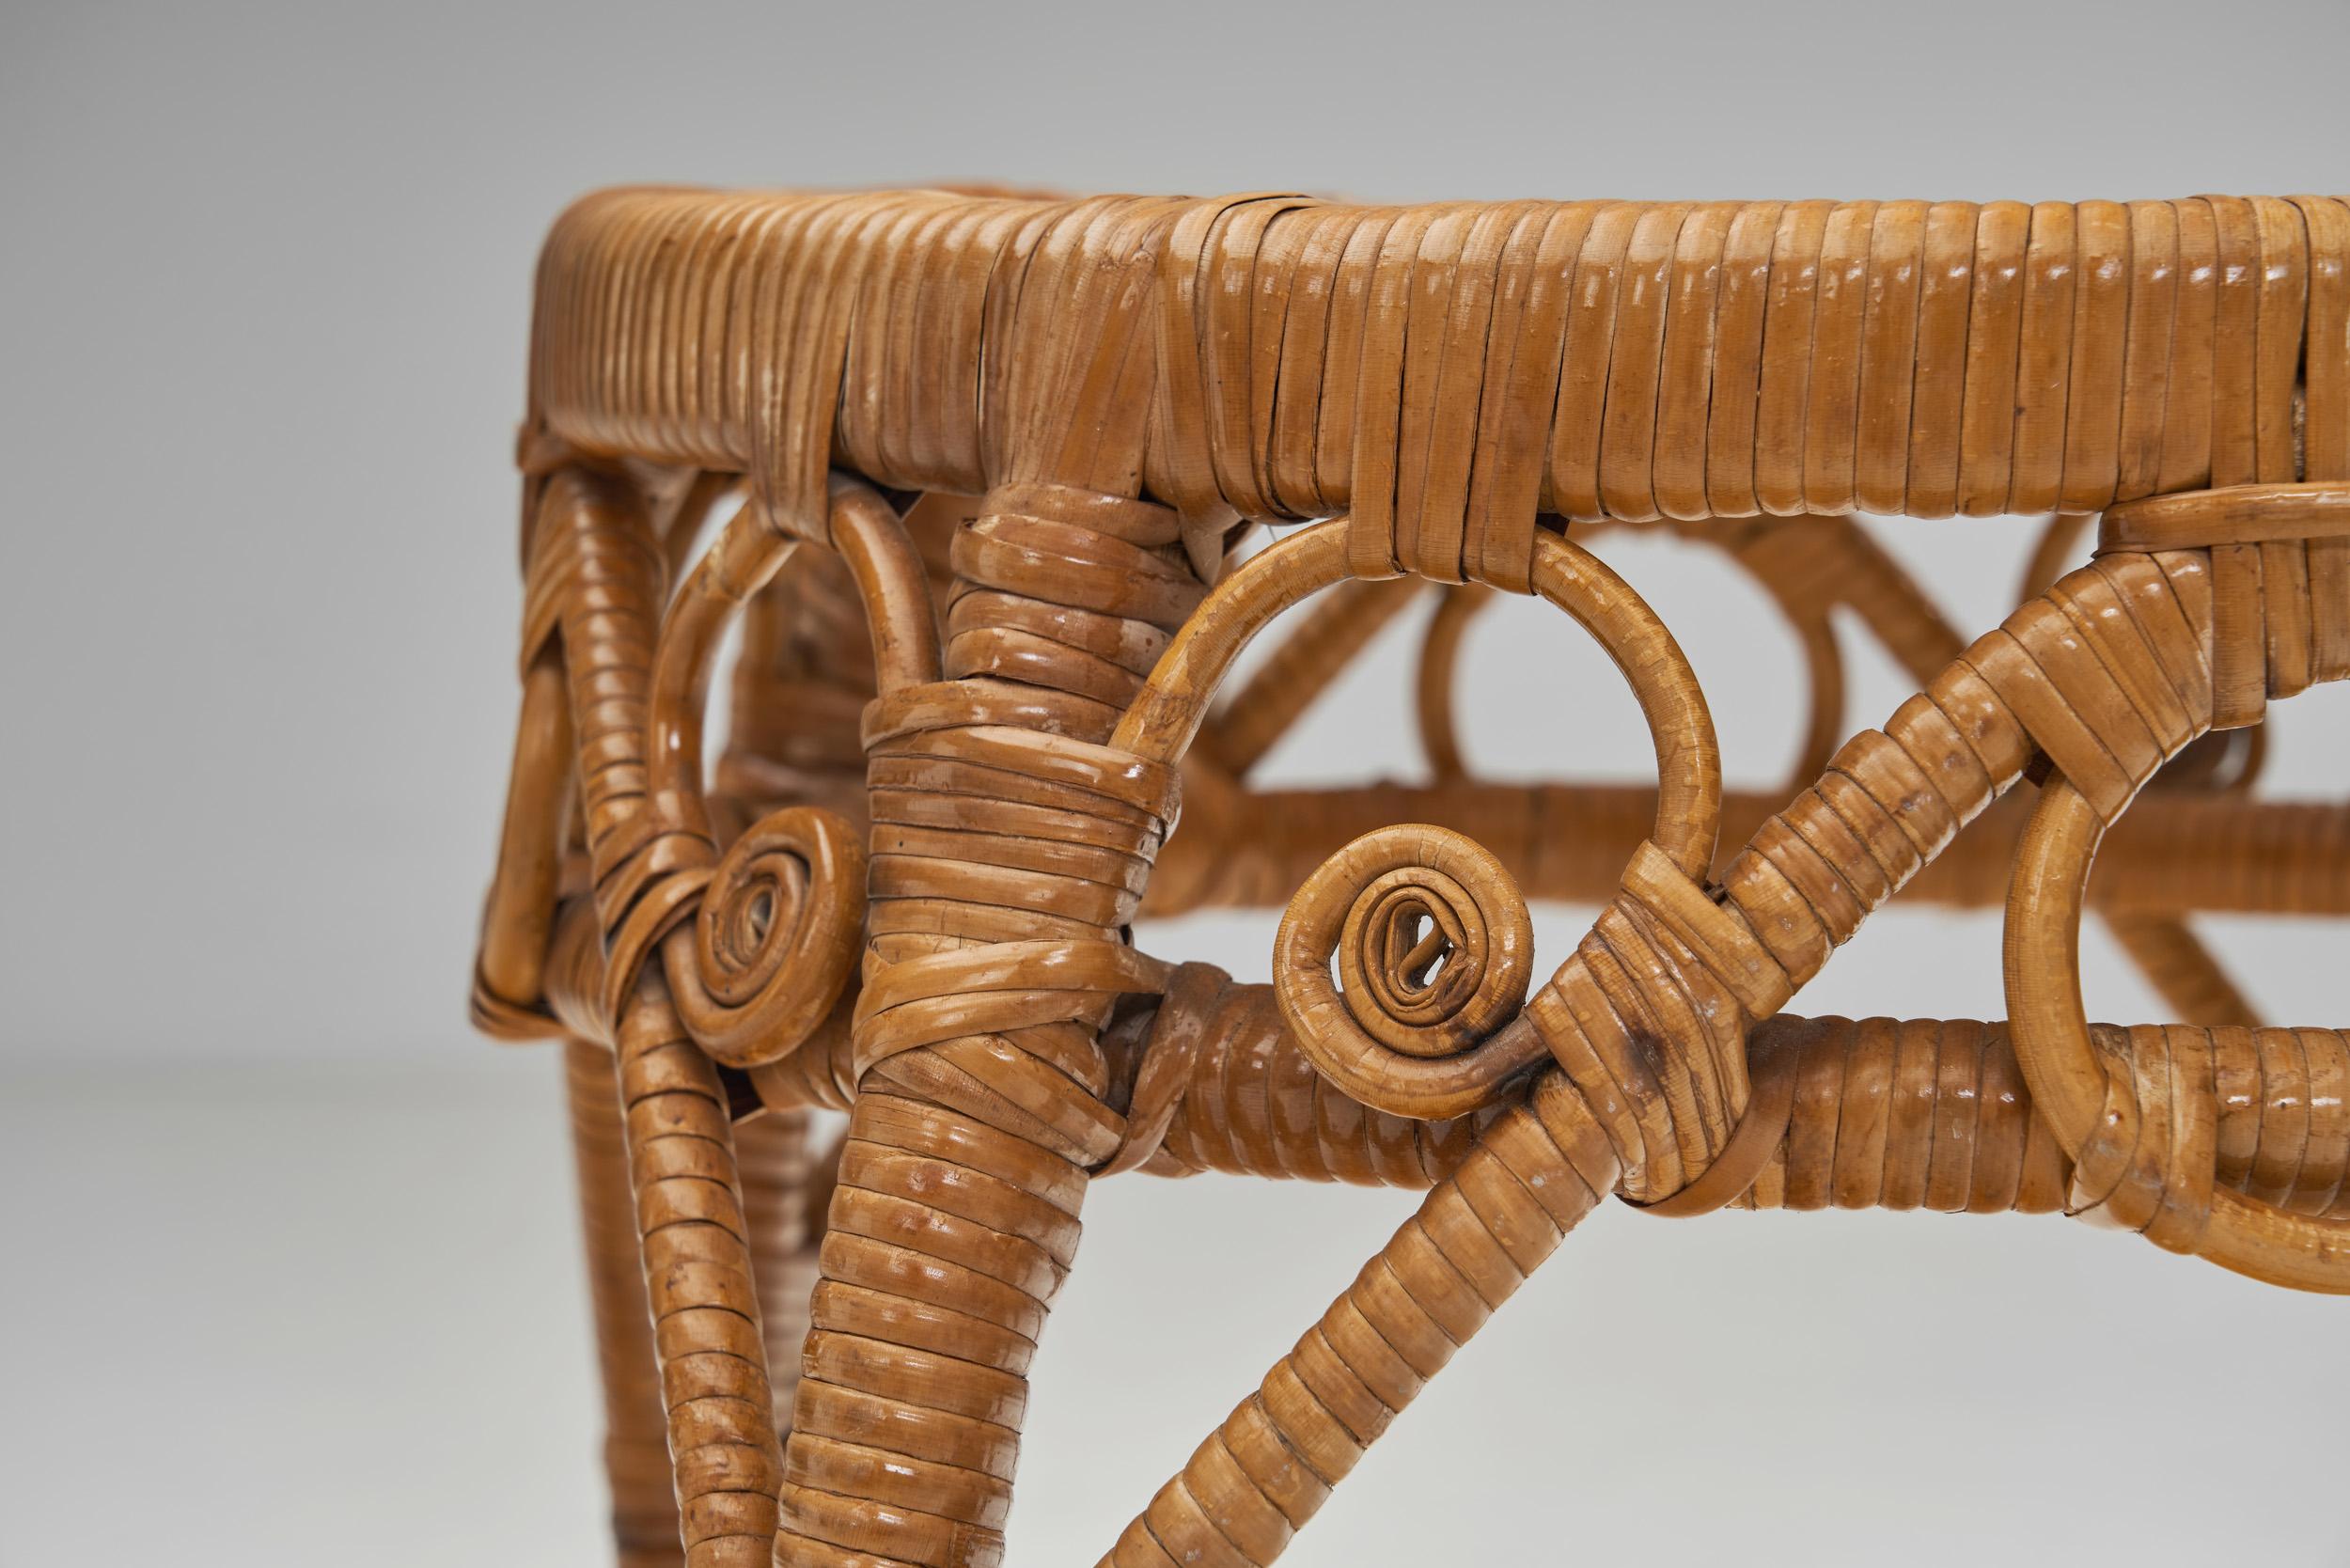 Woven Rattan Stool, Europe Early 20th Century For Sale 2